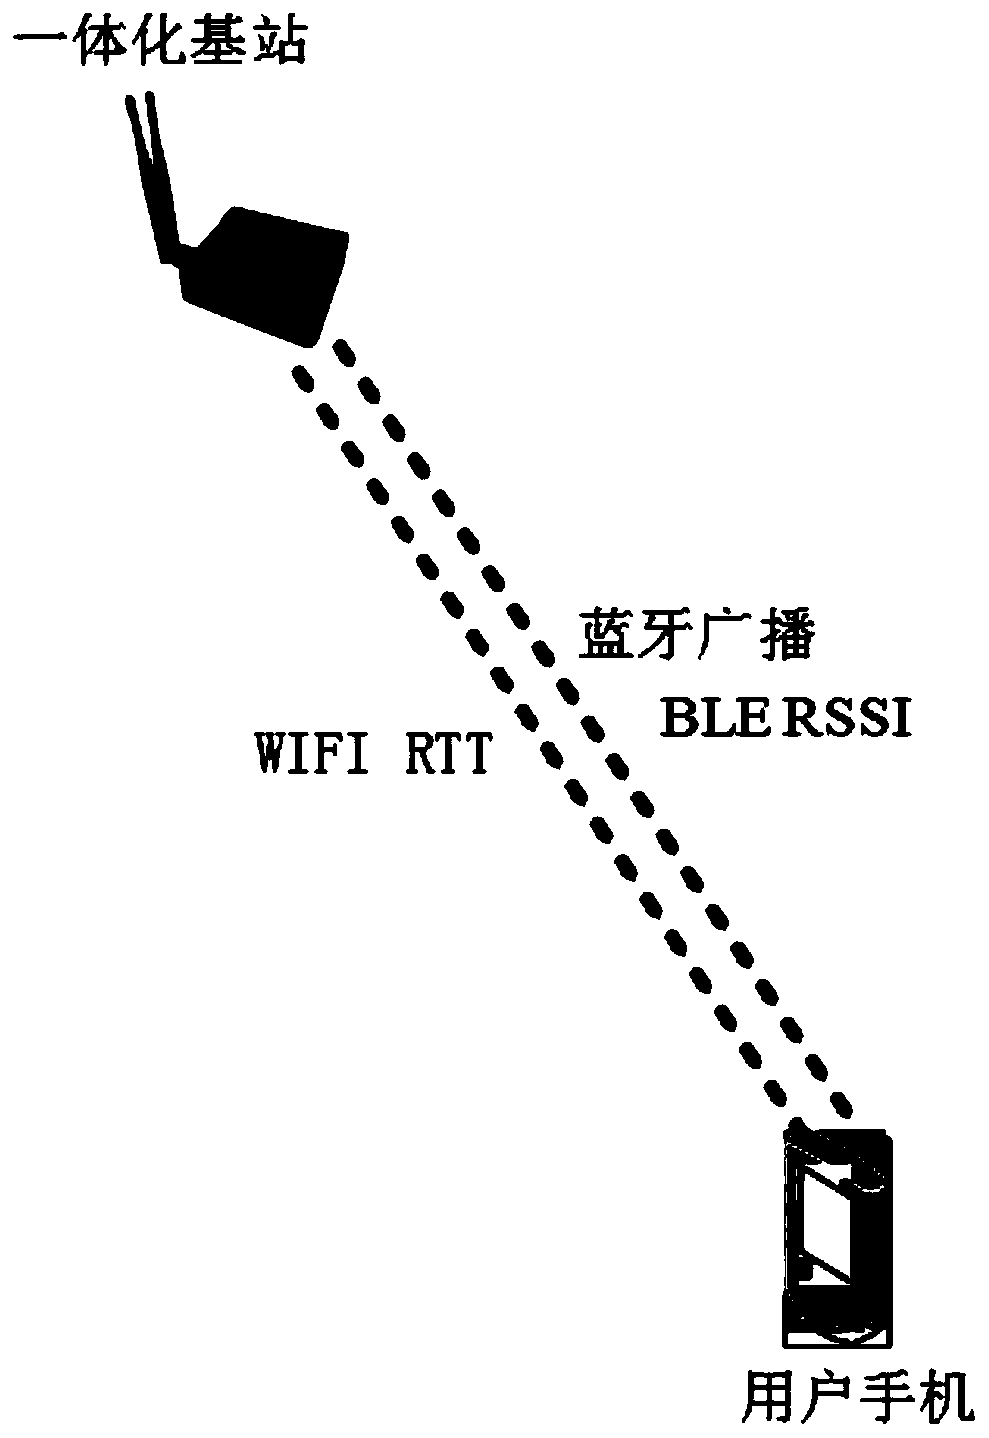 Wi-Fi Bluetooth integrated base station positioning system